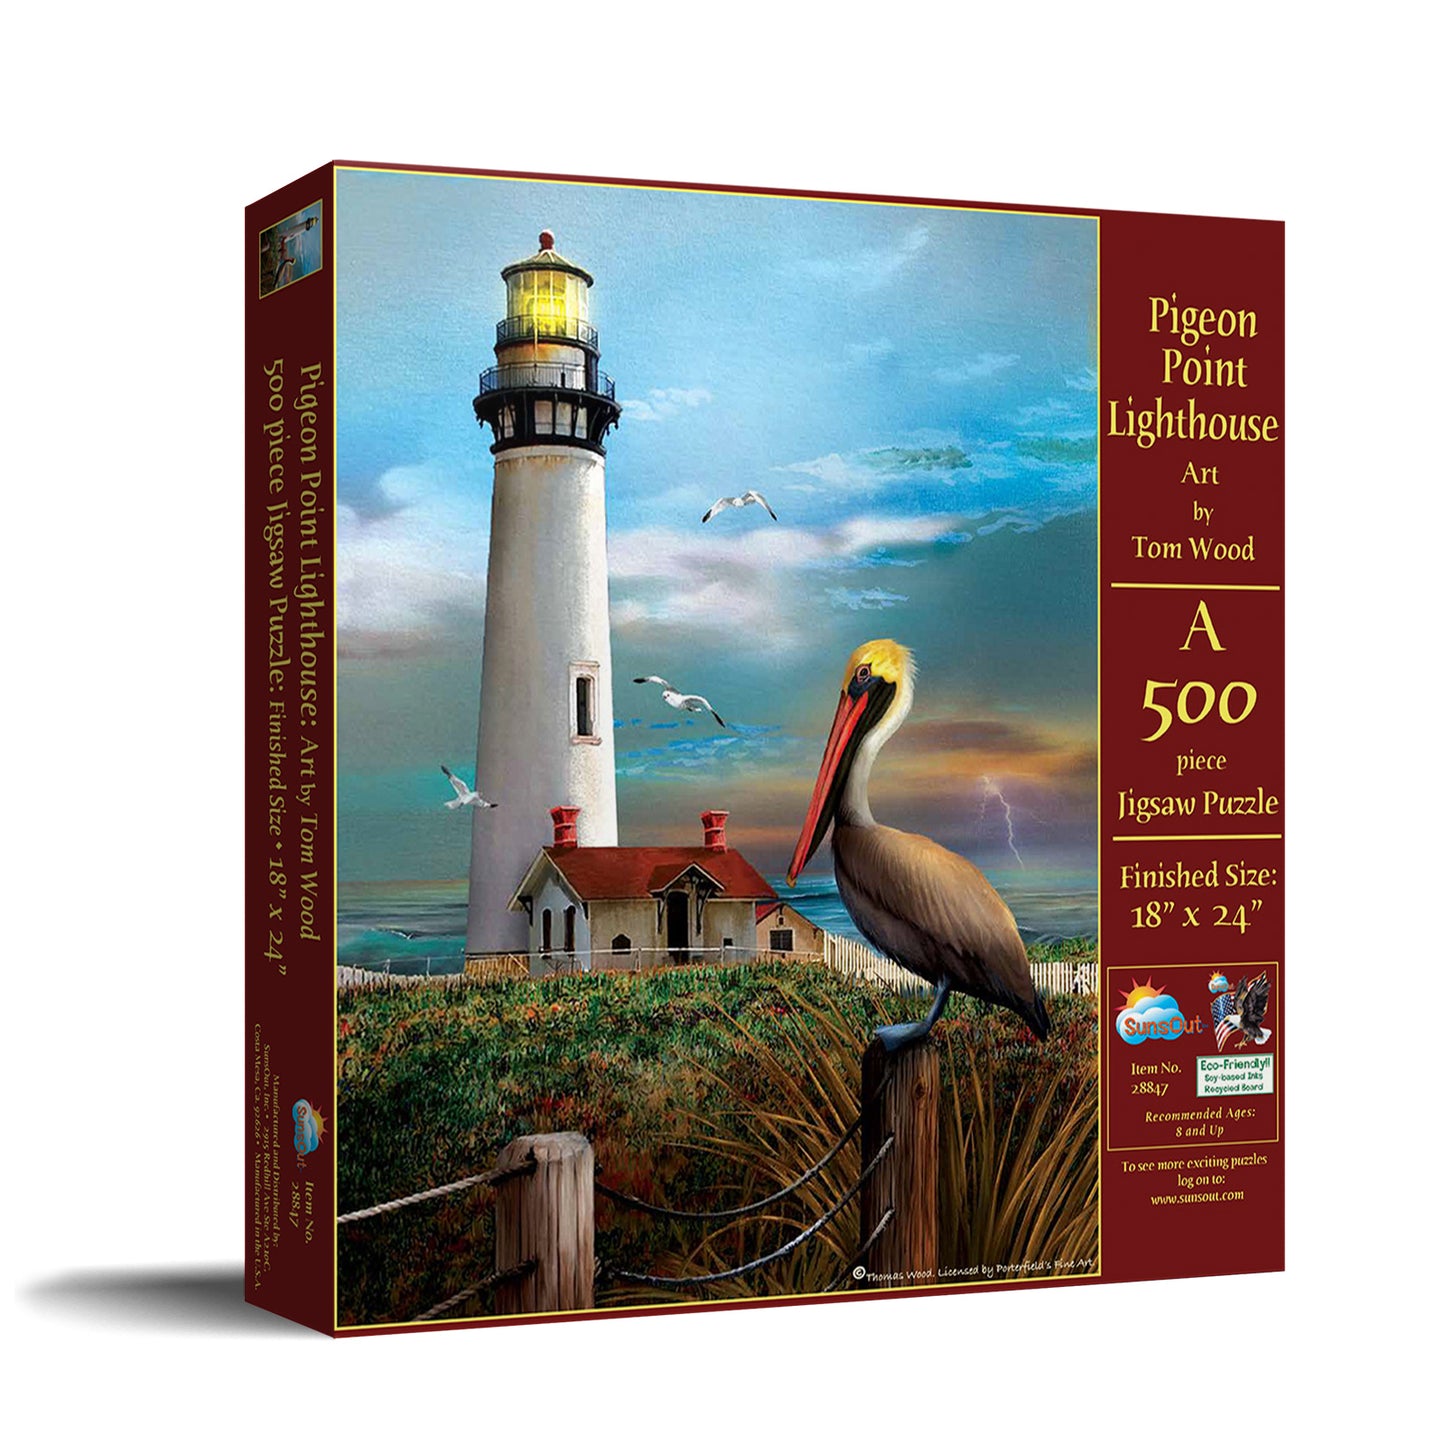 Pigeon Point Lighthouse - 500 Piece Jigsaw Puzzle